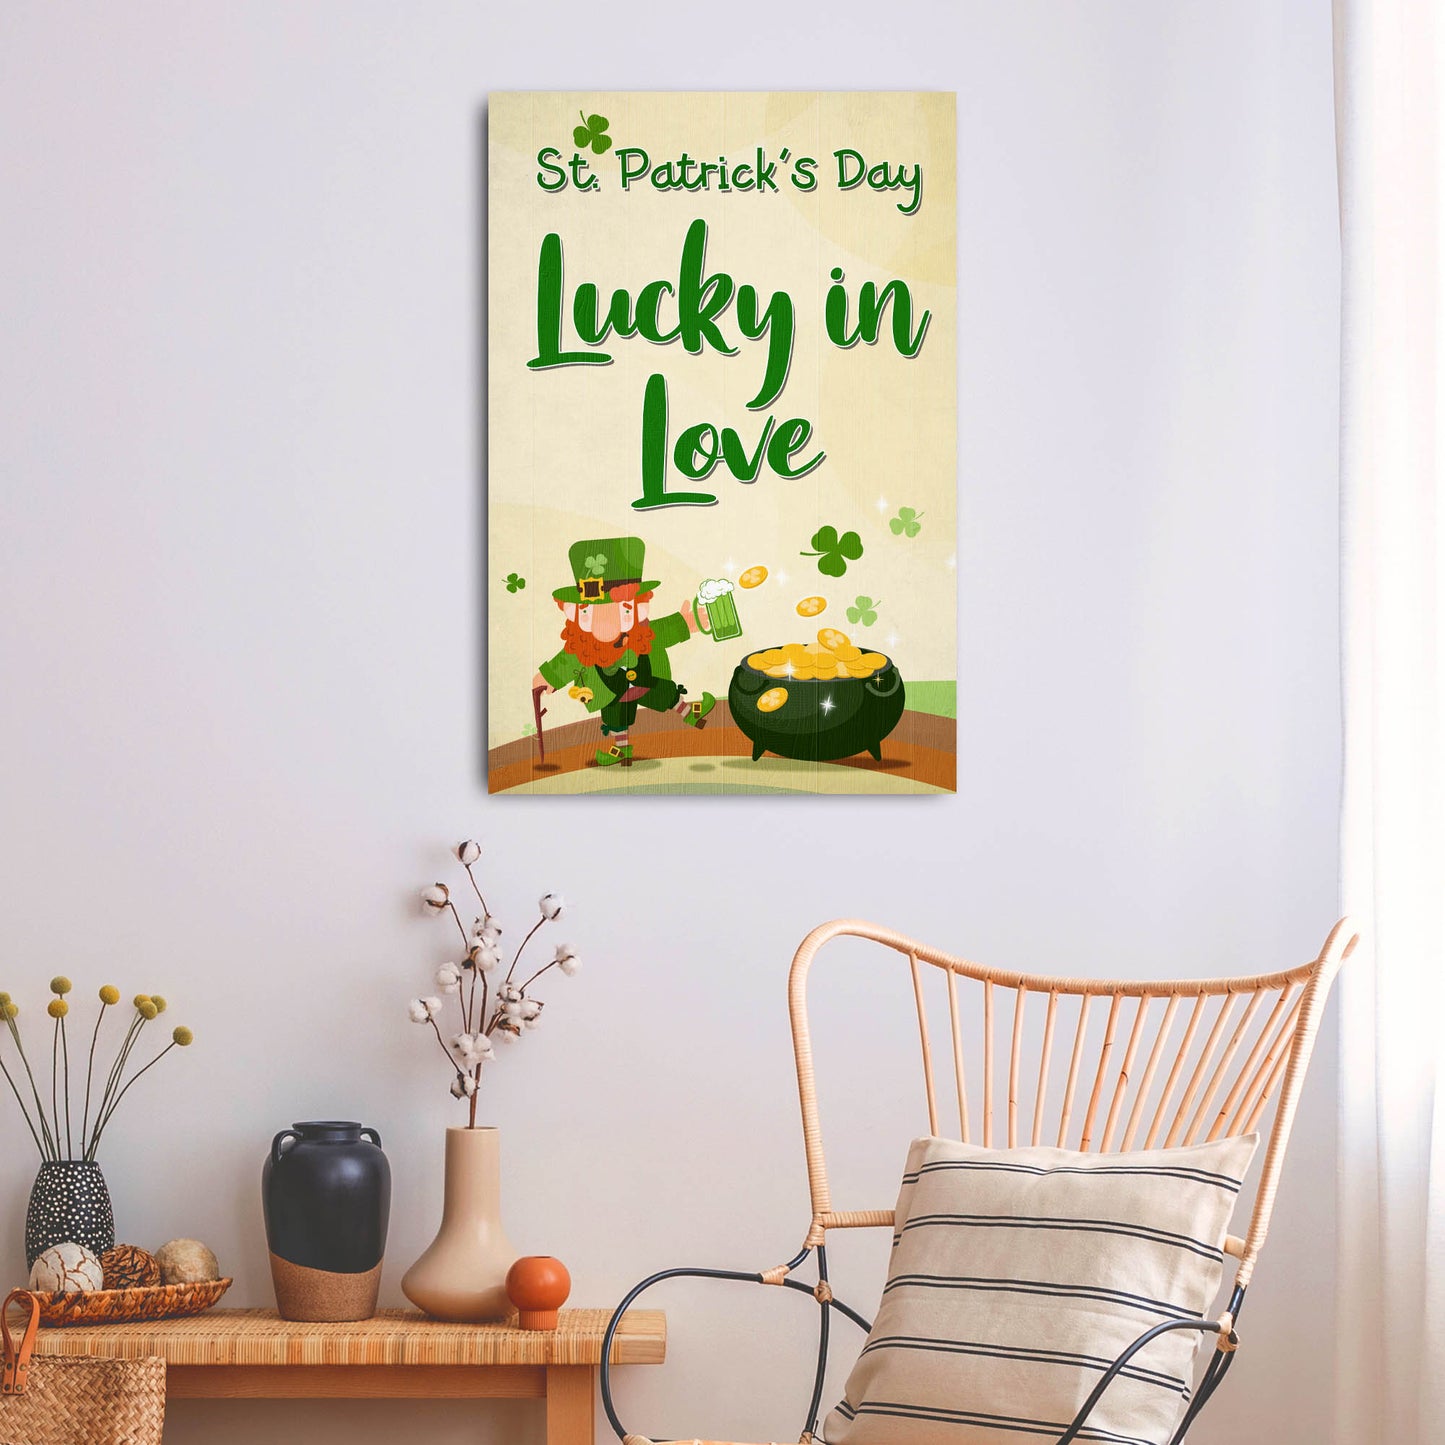 St. Patrick's Day Lucky In Love Sign - Image by Tailored Canvases